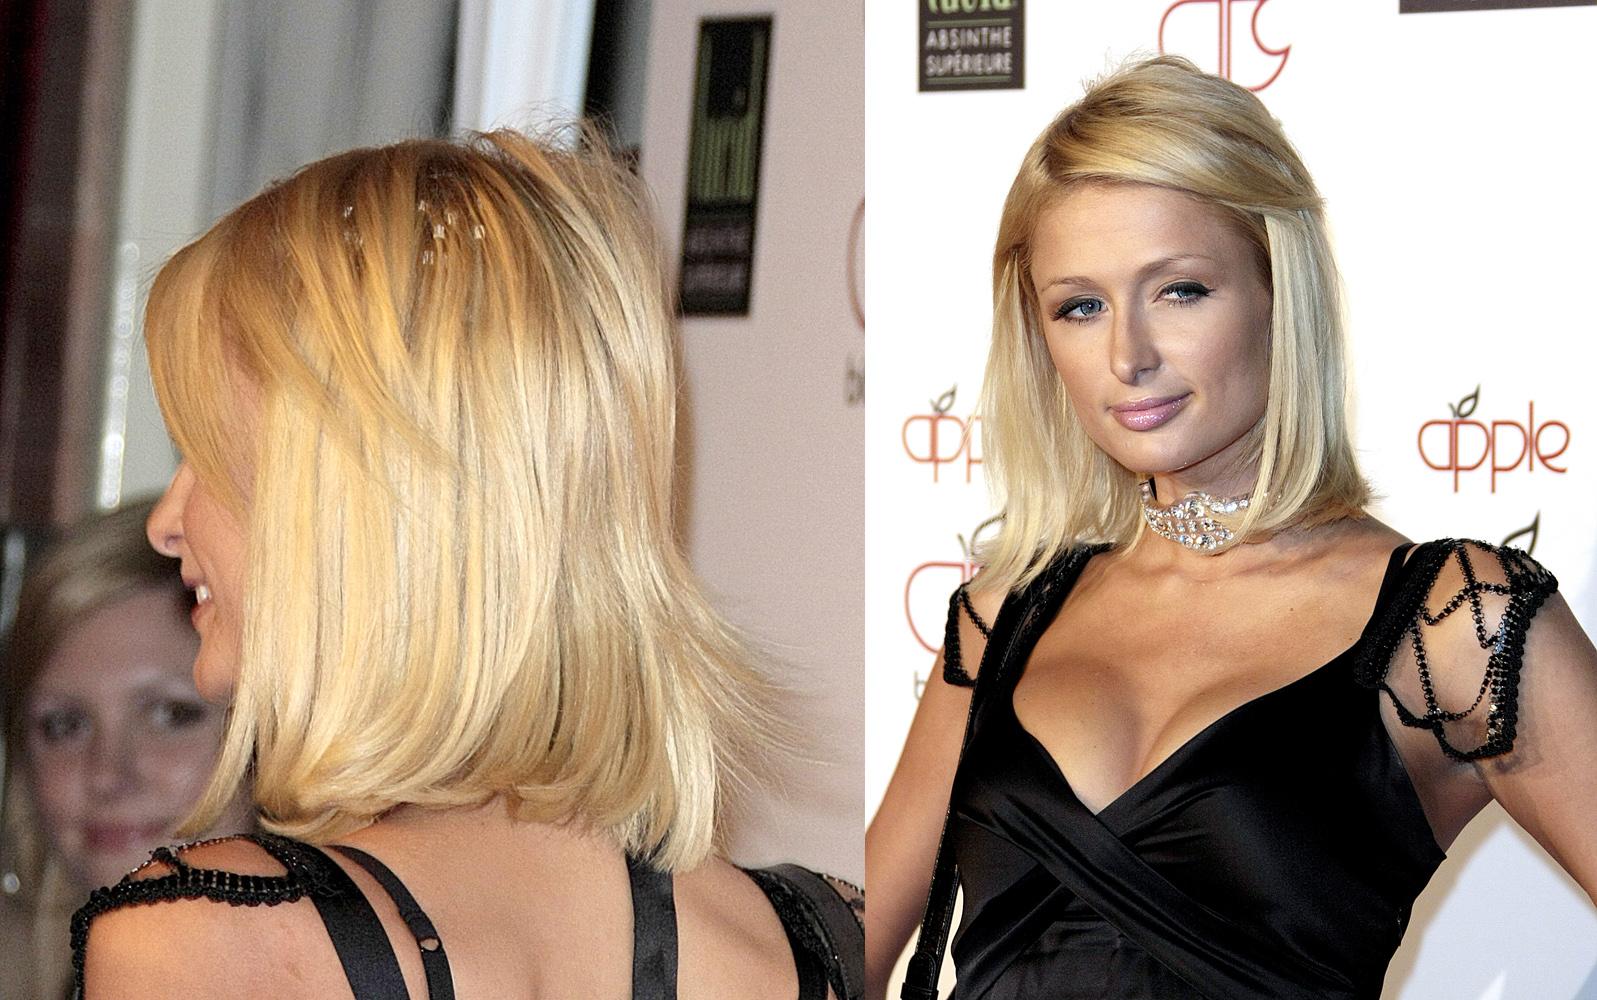 celebrity hair extensions